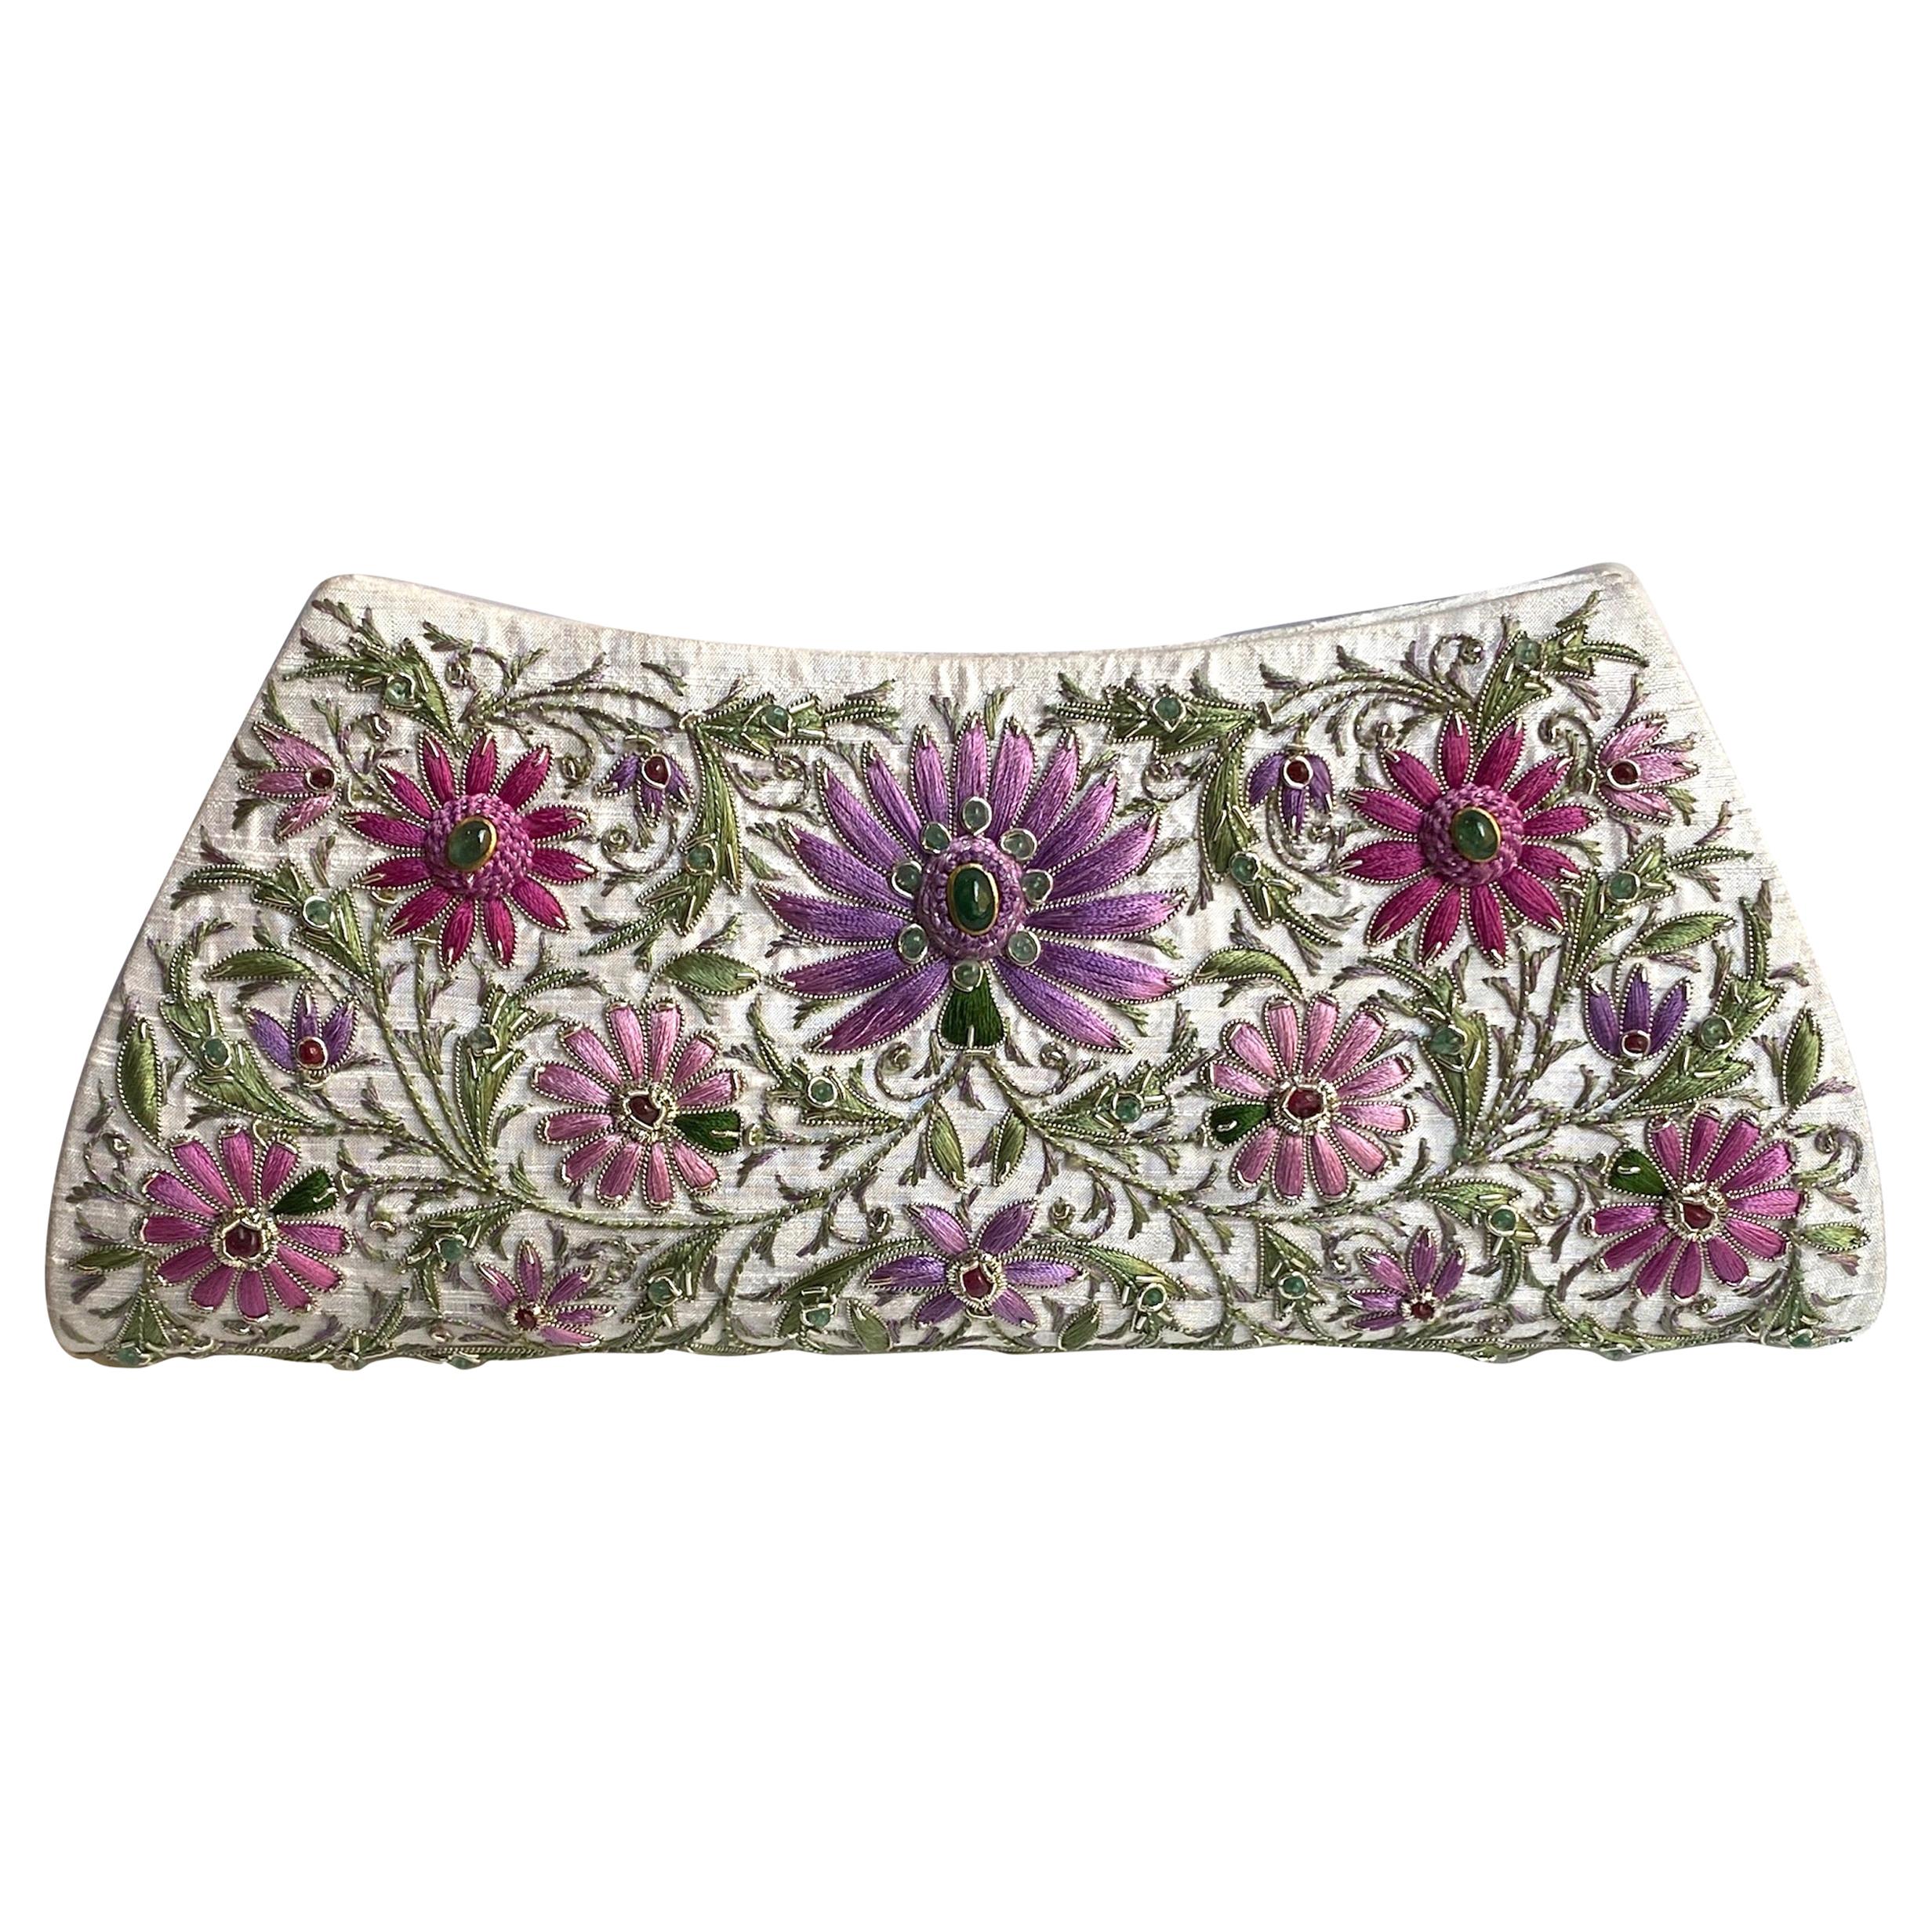 Emerald & Ruby Silk Jewel Embroidered Evening Bag